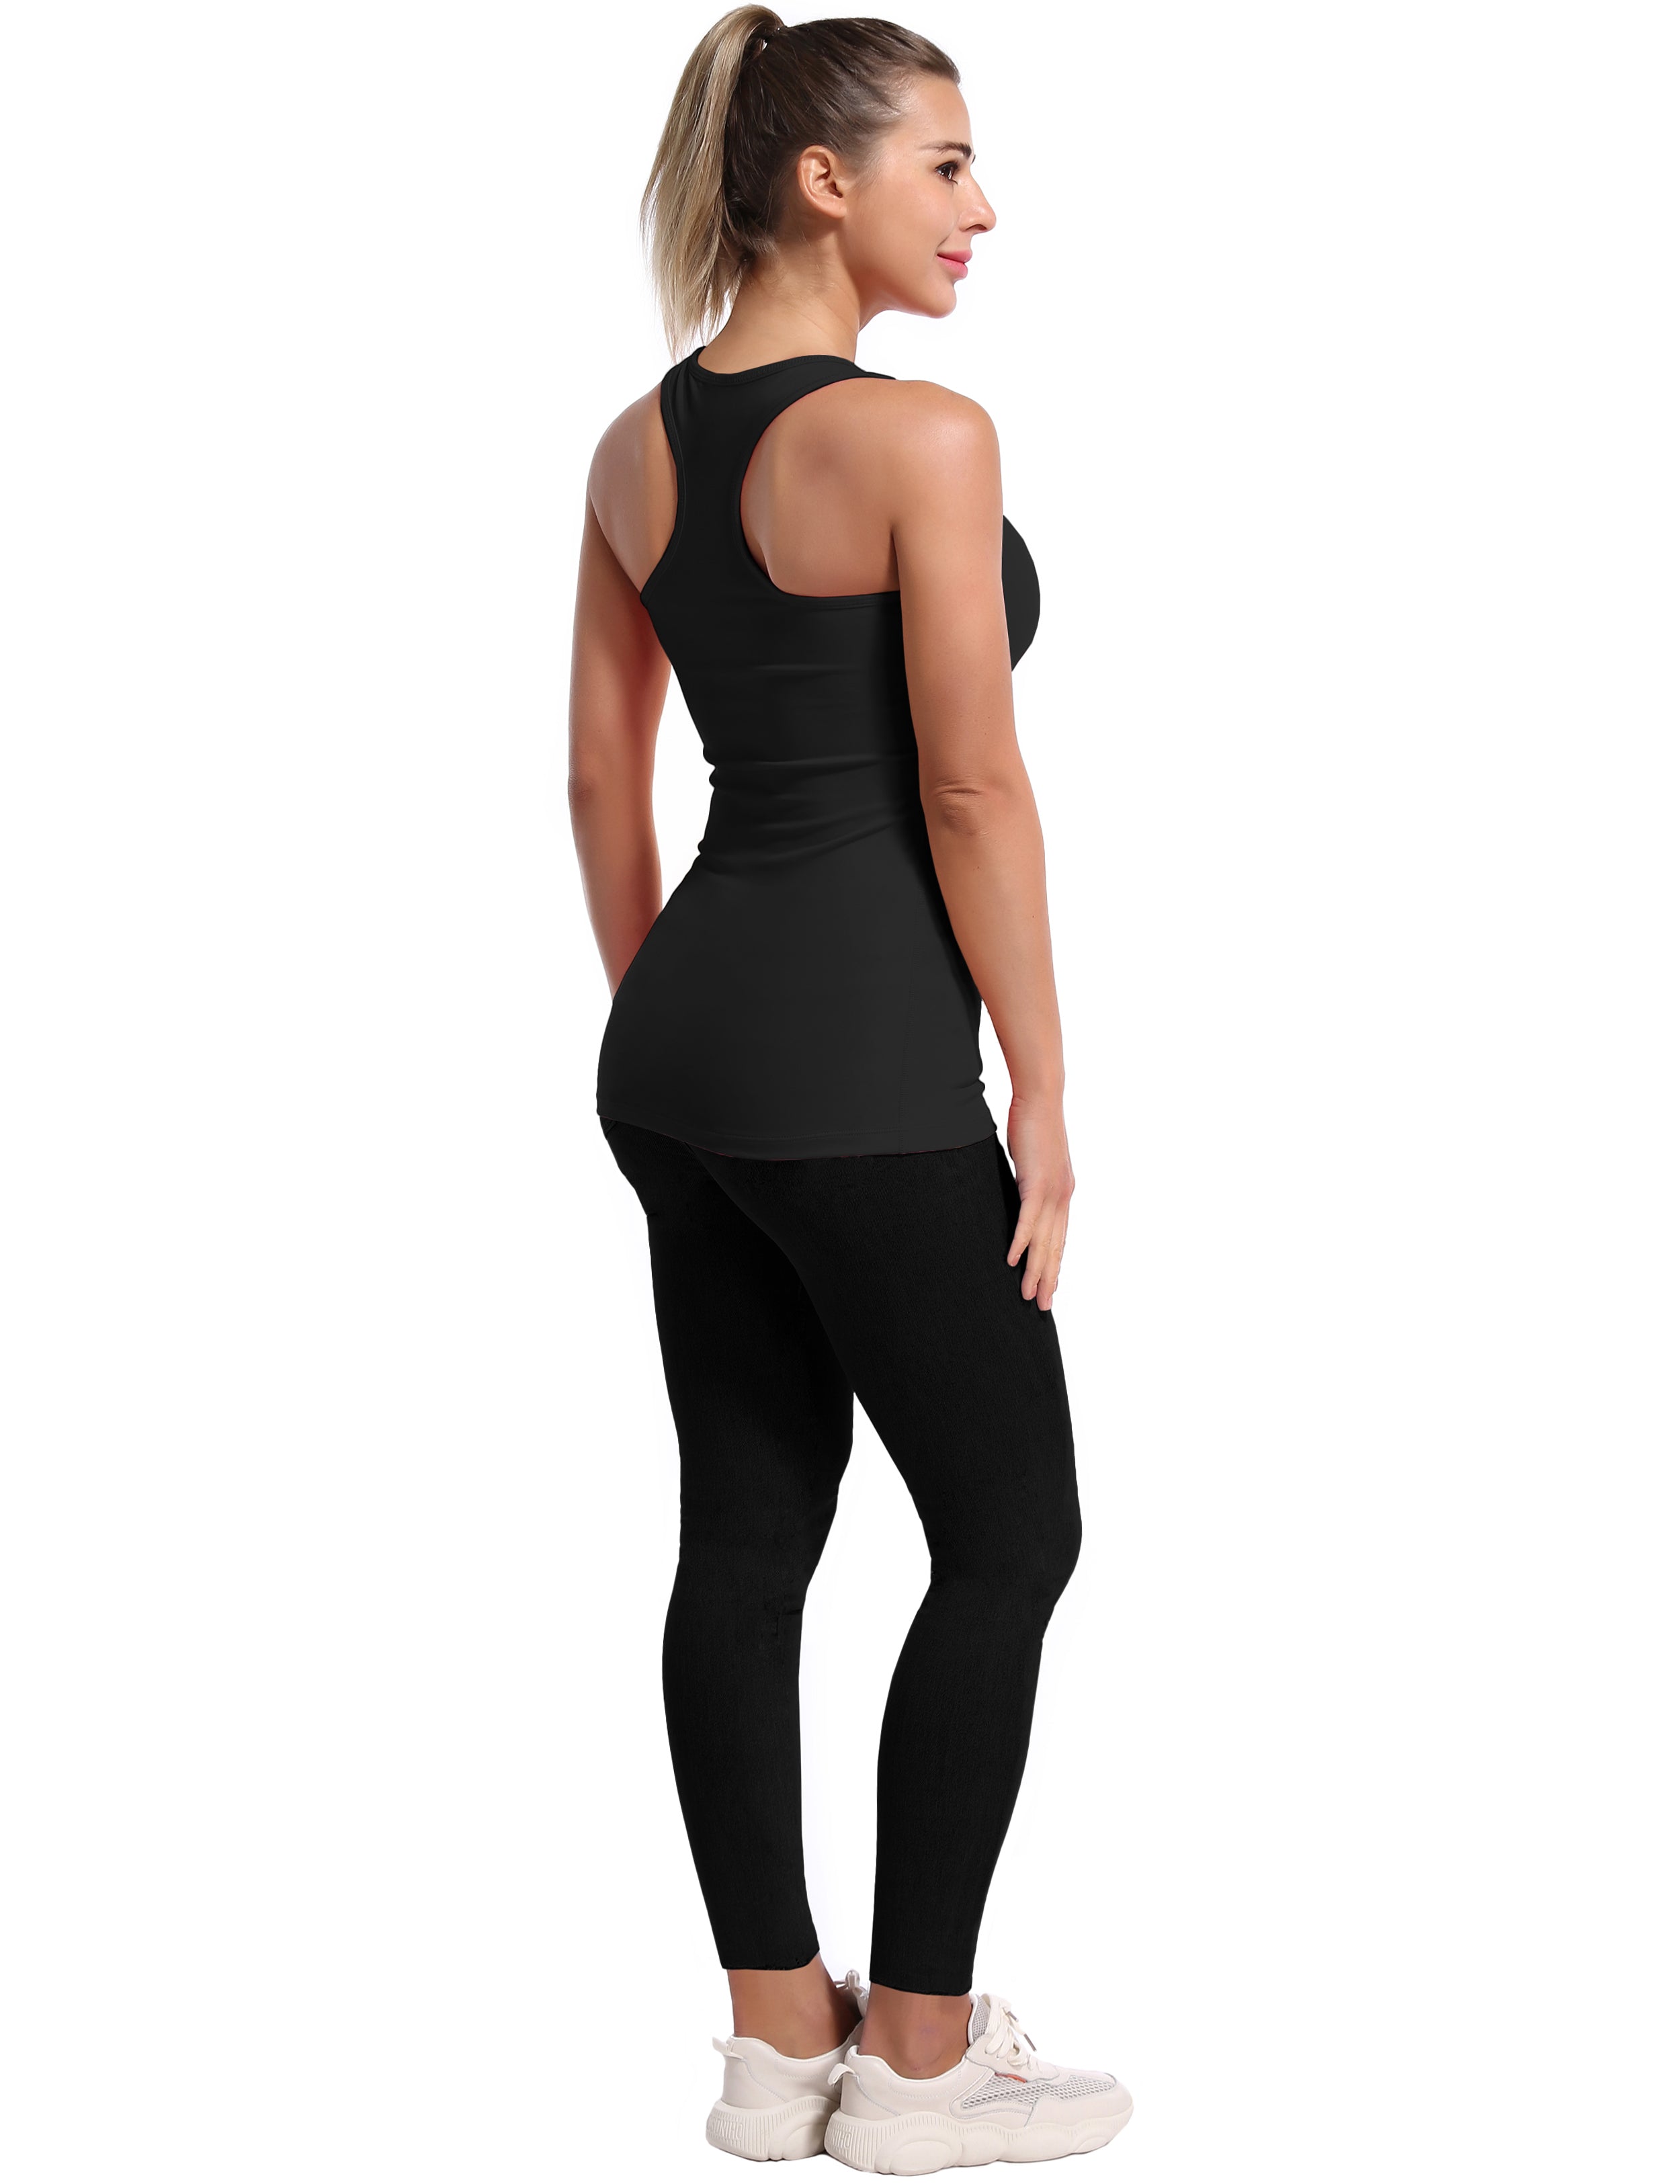 Racerback Athletic Tank Tops black 92%Nylon/8%Spandex(Cotton Soft) Designed for Golf Tight Fit So buttery soft, it feels weightless Sweat-wicking Four-way stretch Breathable Contours your body Sits below the waistband for moderate, everyday coverage